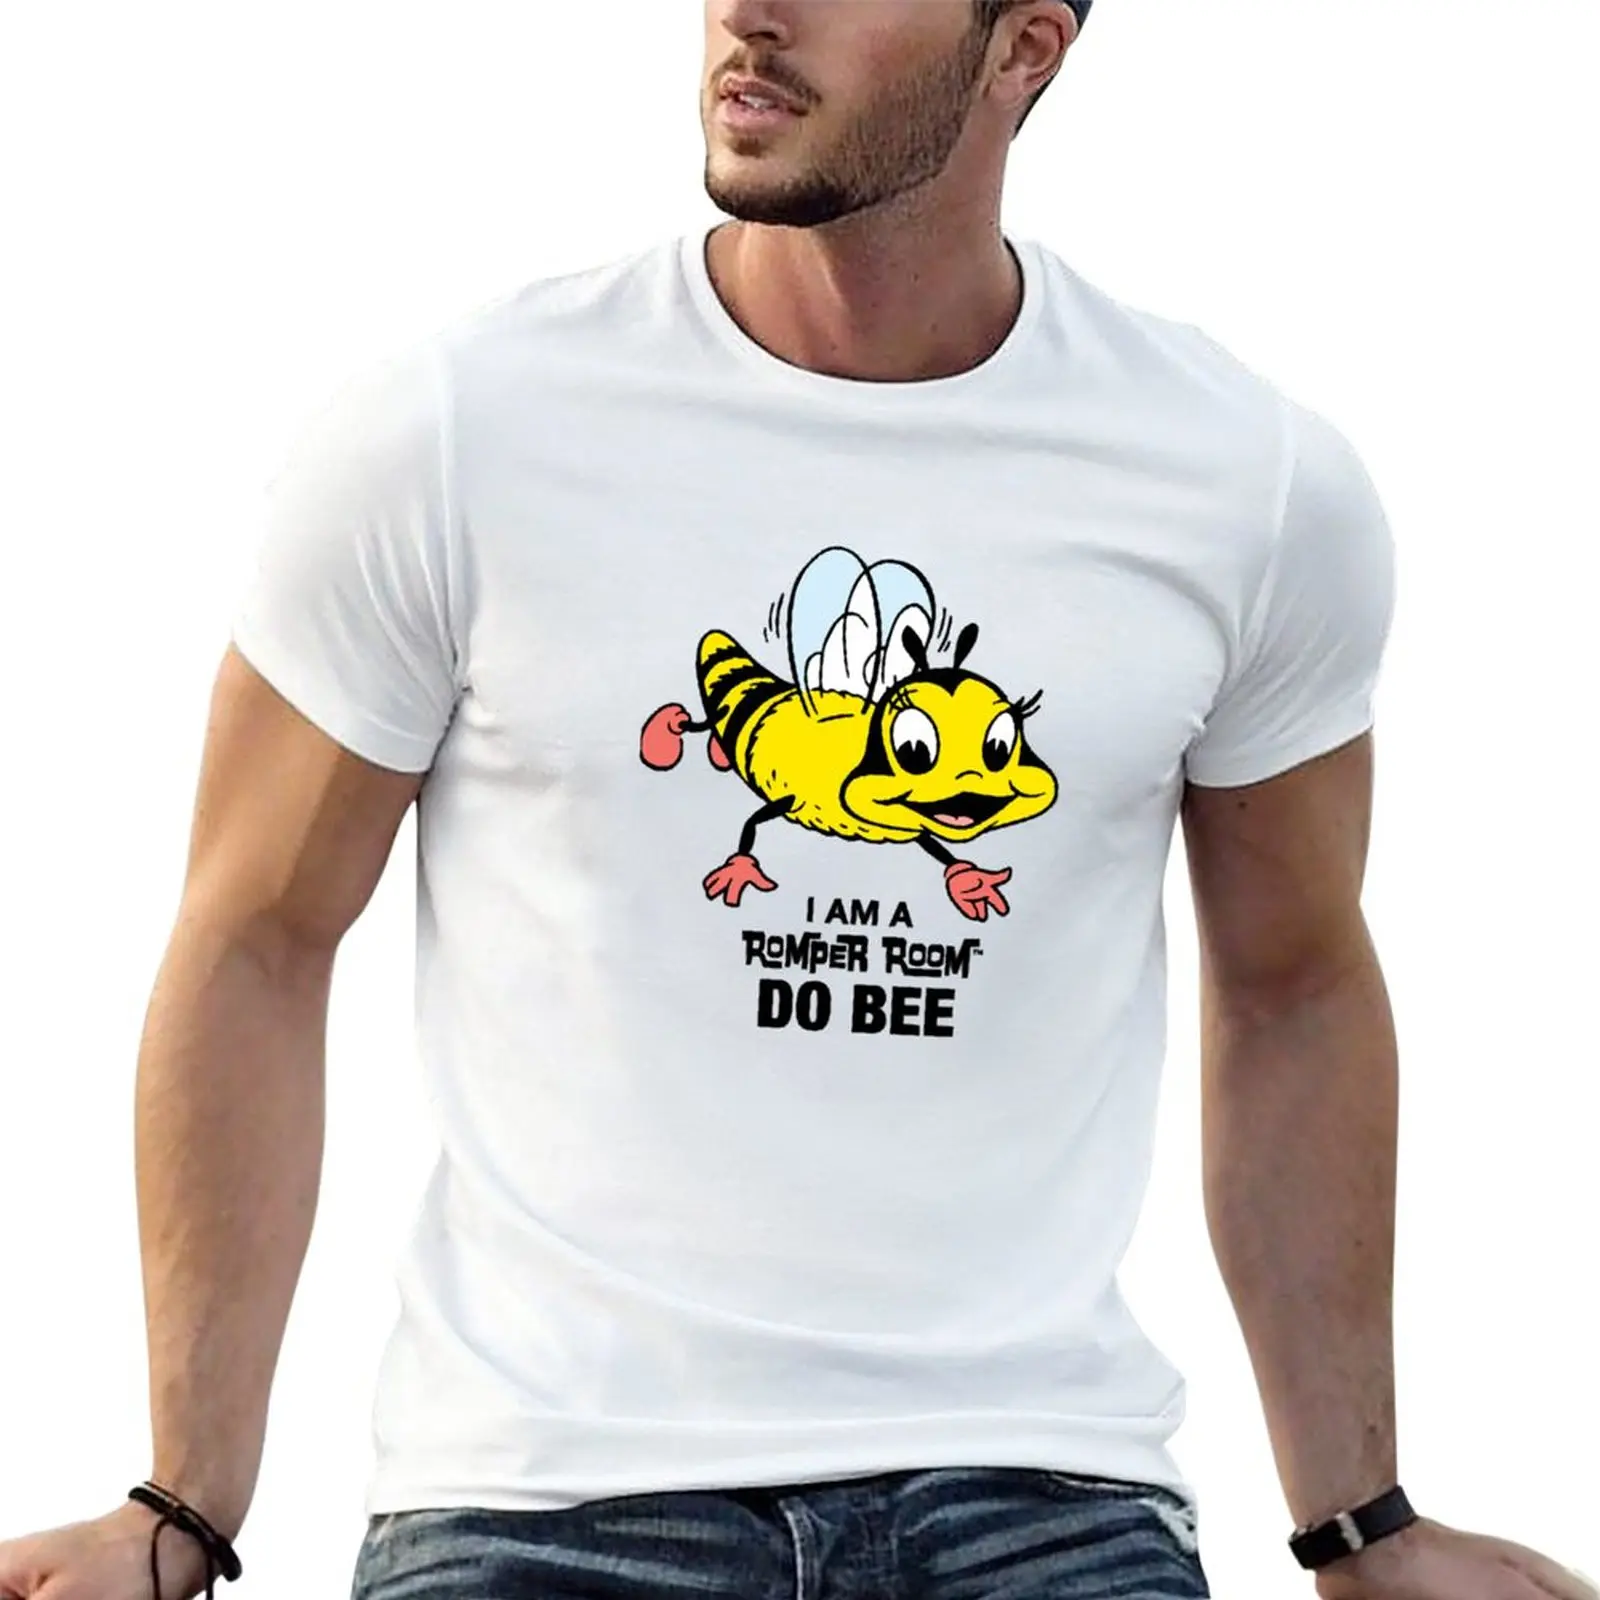 

New Romper Room Do Bee T-Shirt| Perfect Gift T-Shirt T-Shirt tops plus size tops mens t shirts